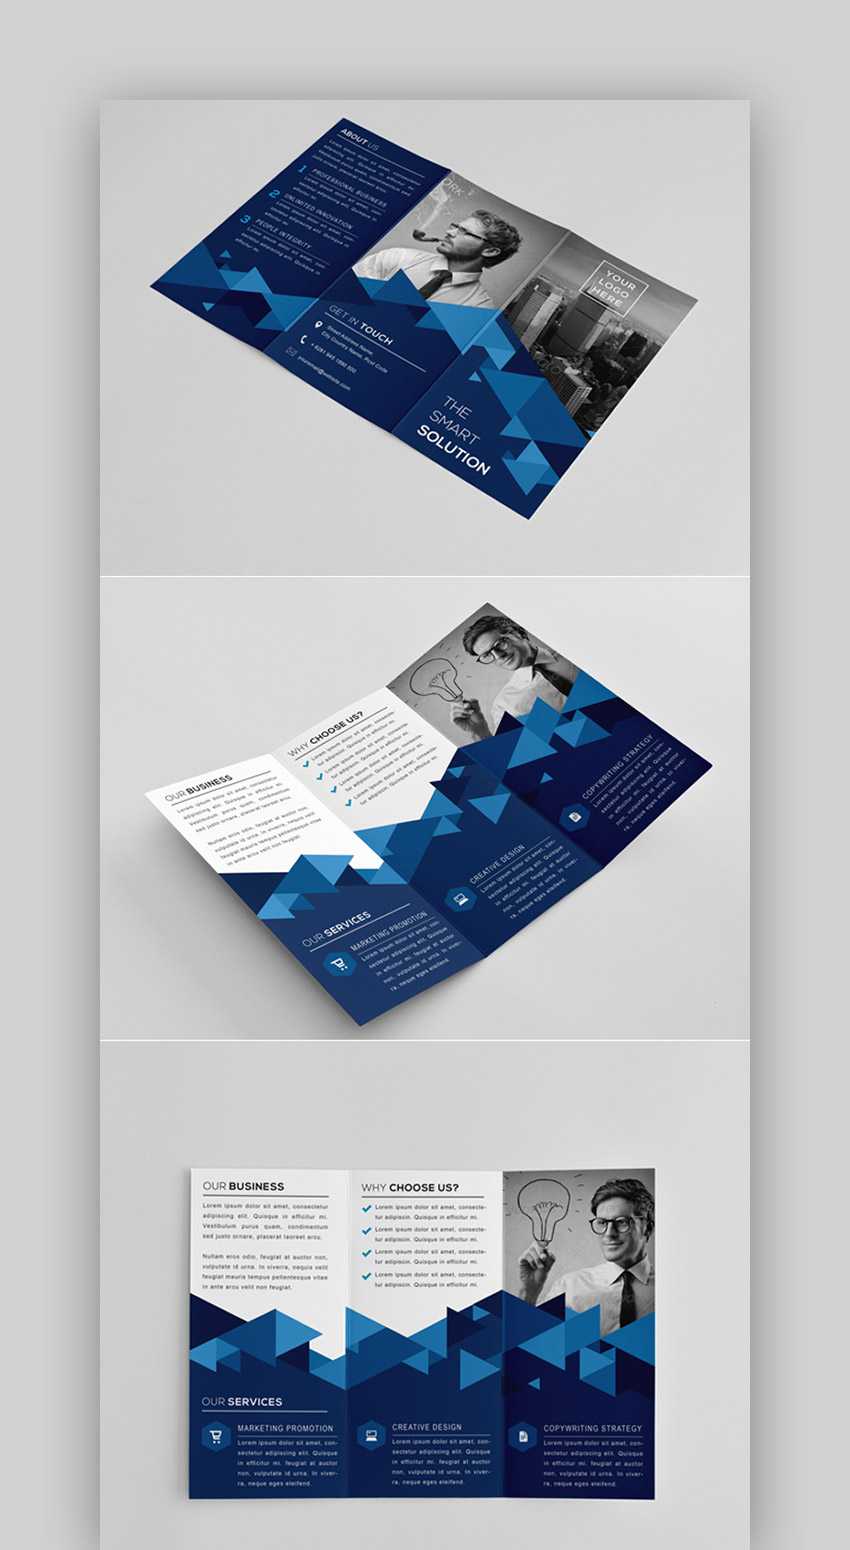 35 Best Indesign Brochure Templates – Creative Business Pertaining To Tri Fold Brochure Template Indesign Free Download